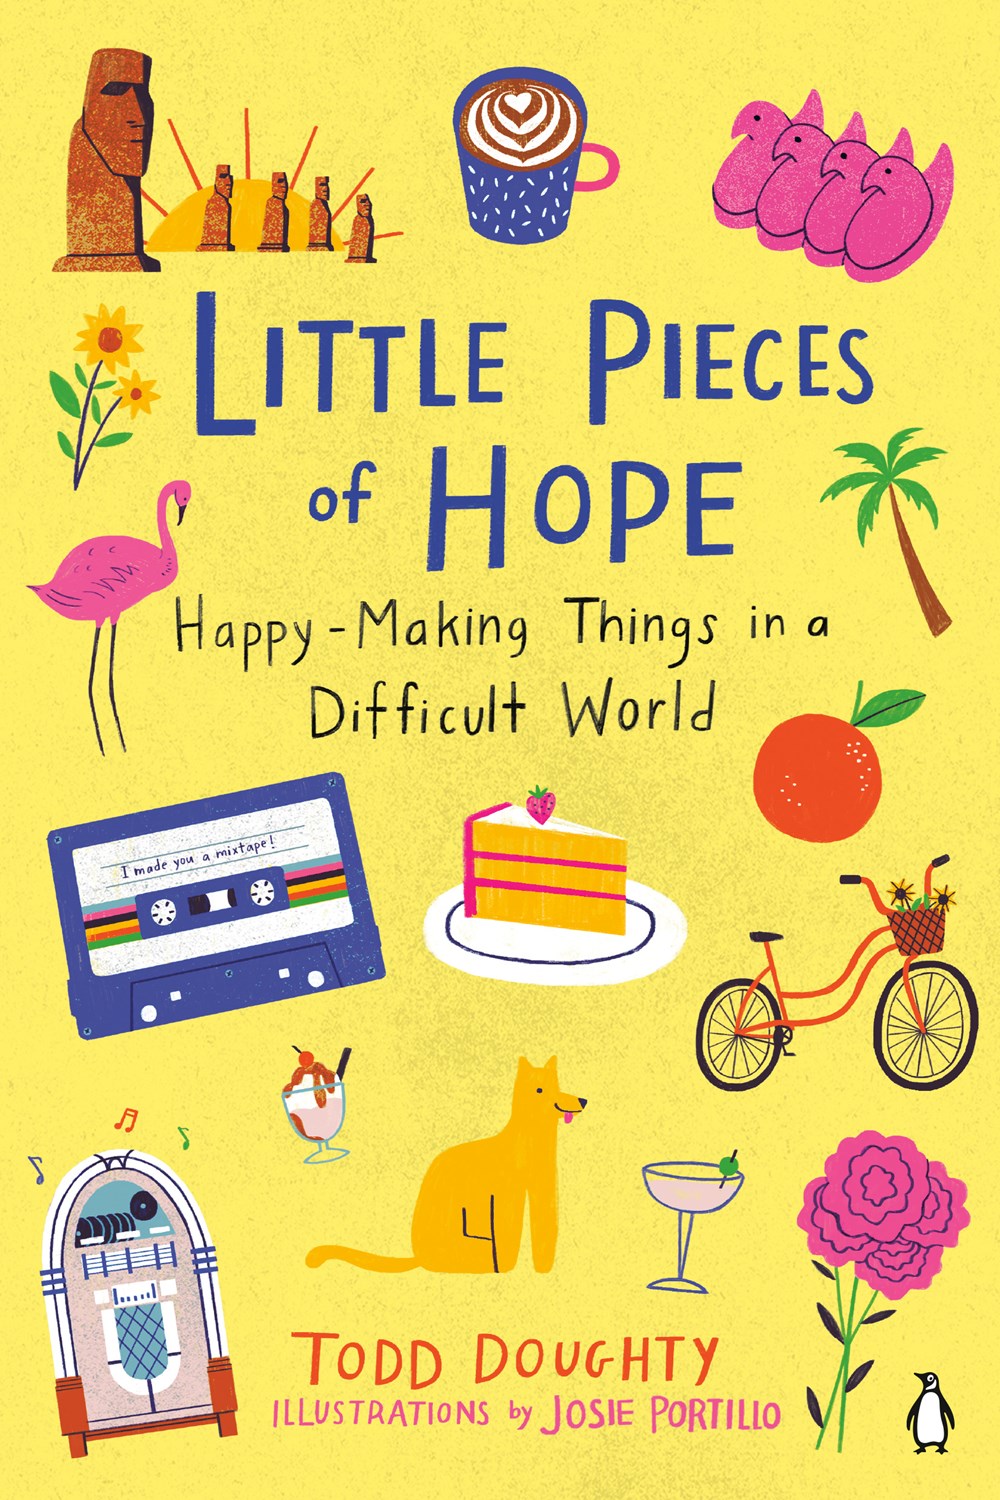 Little Pieces of Hope: Happy-Making Things in a Difficult World by Todd Doughty (Illustrated by Josie Portillo)